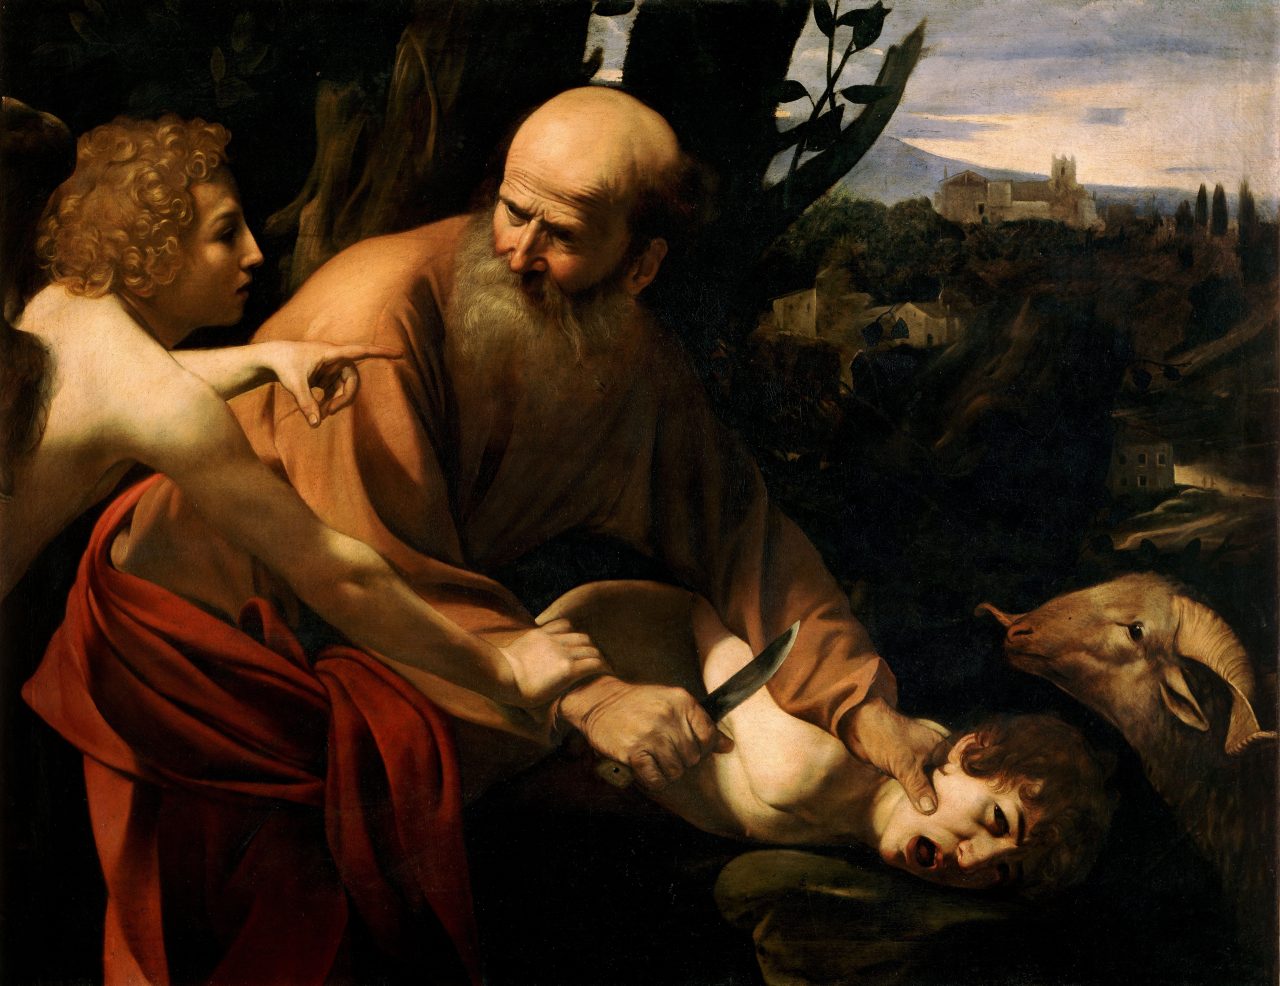 Foto: The Sacrifice of Isaac by Caravaggio / Wikipedia